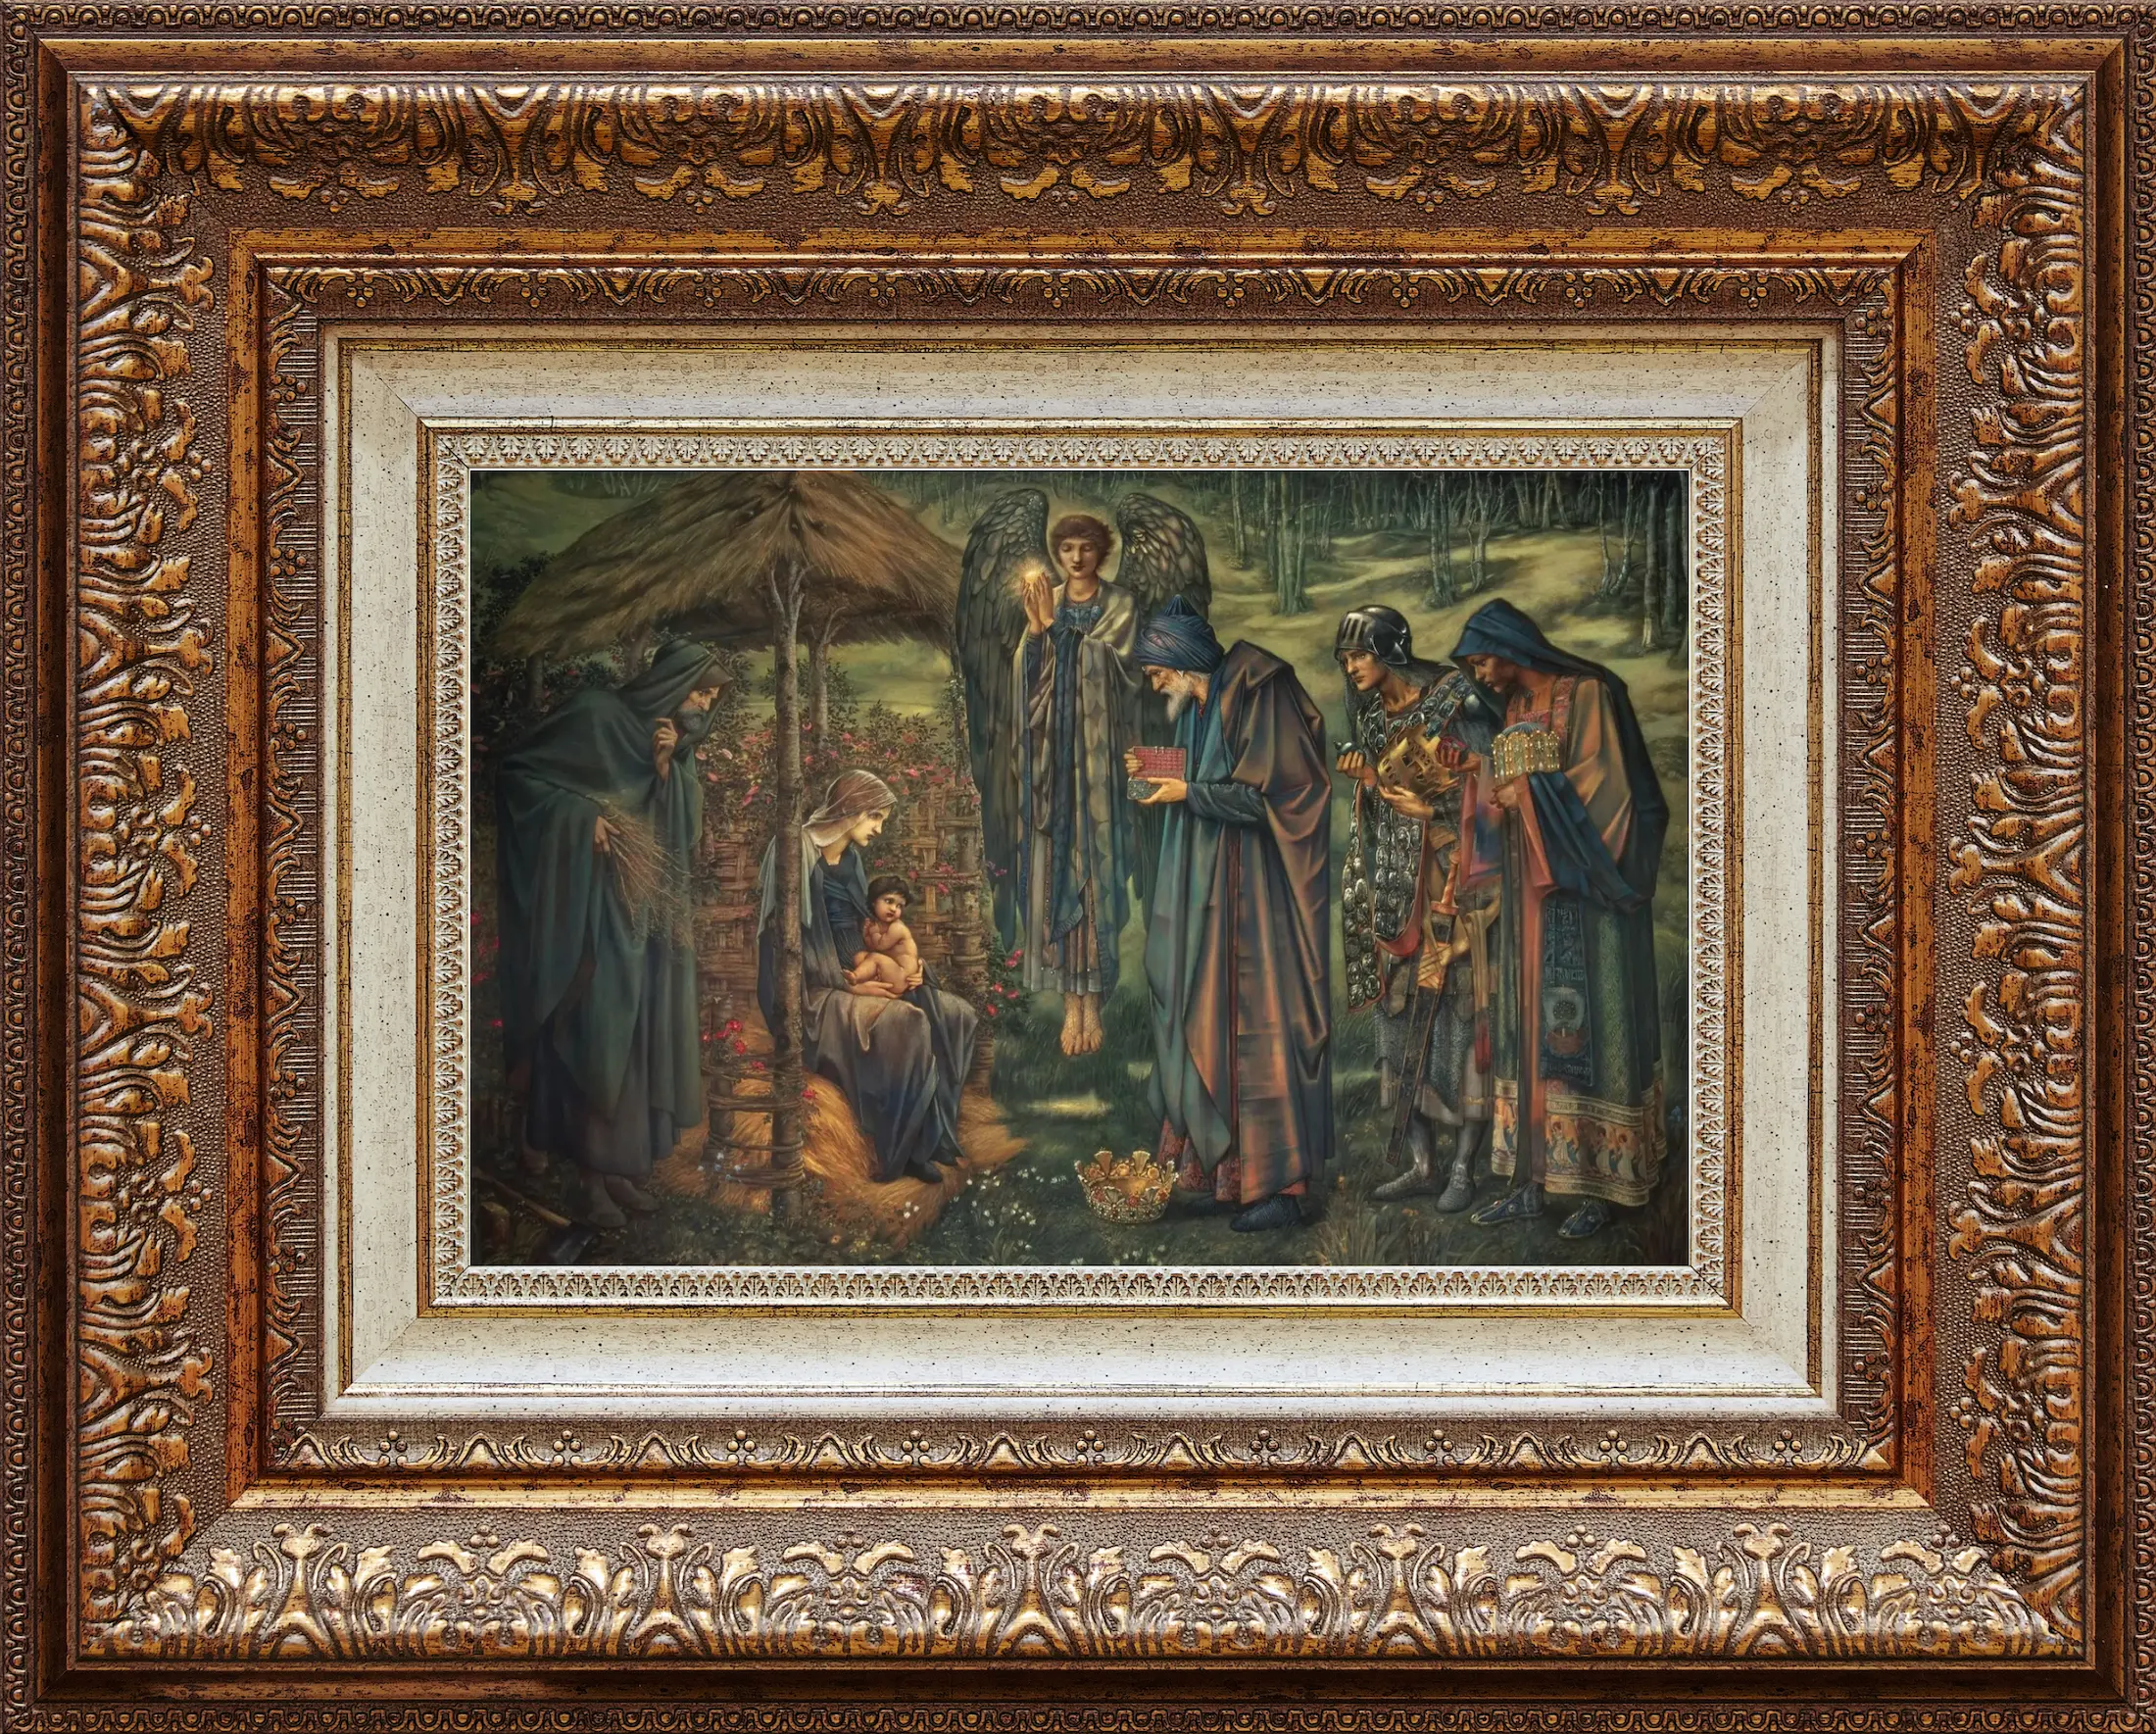 Image of a religious painting